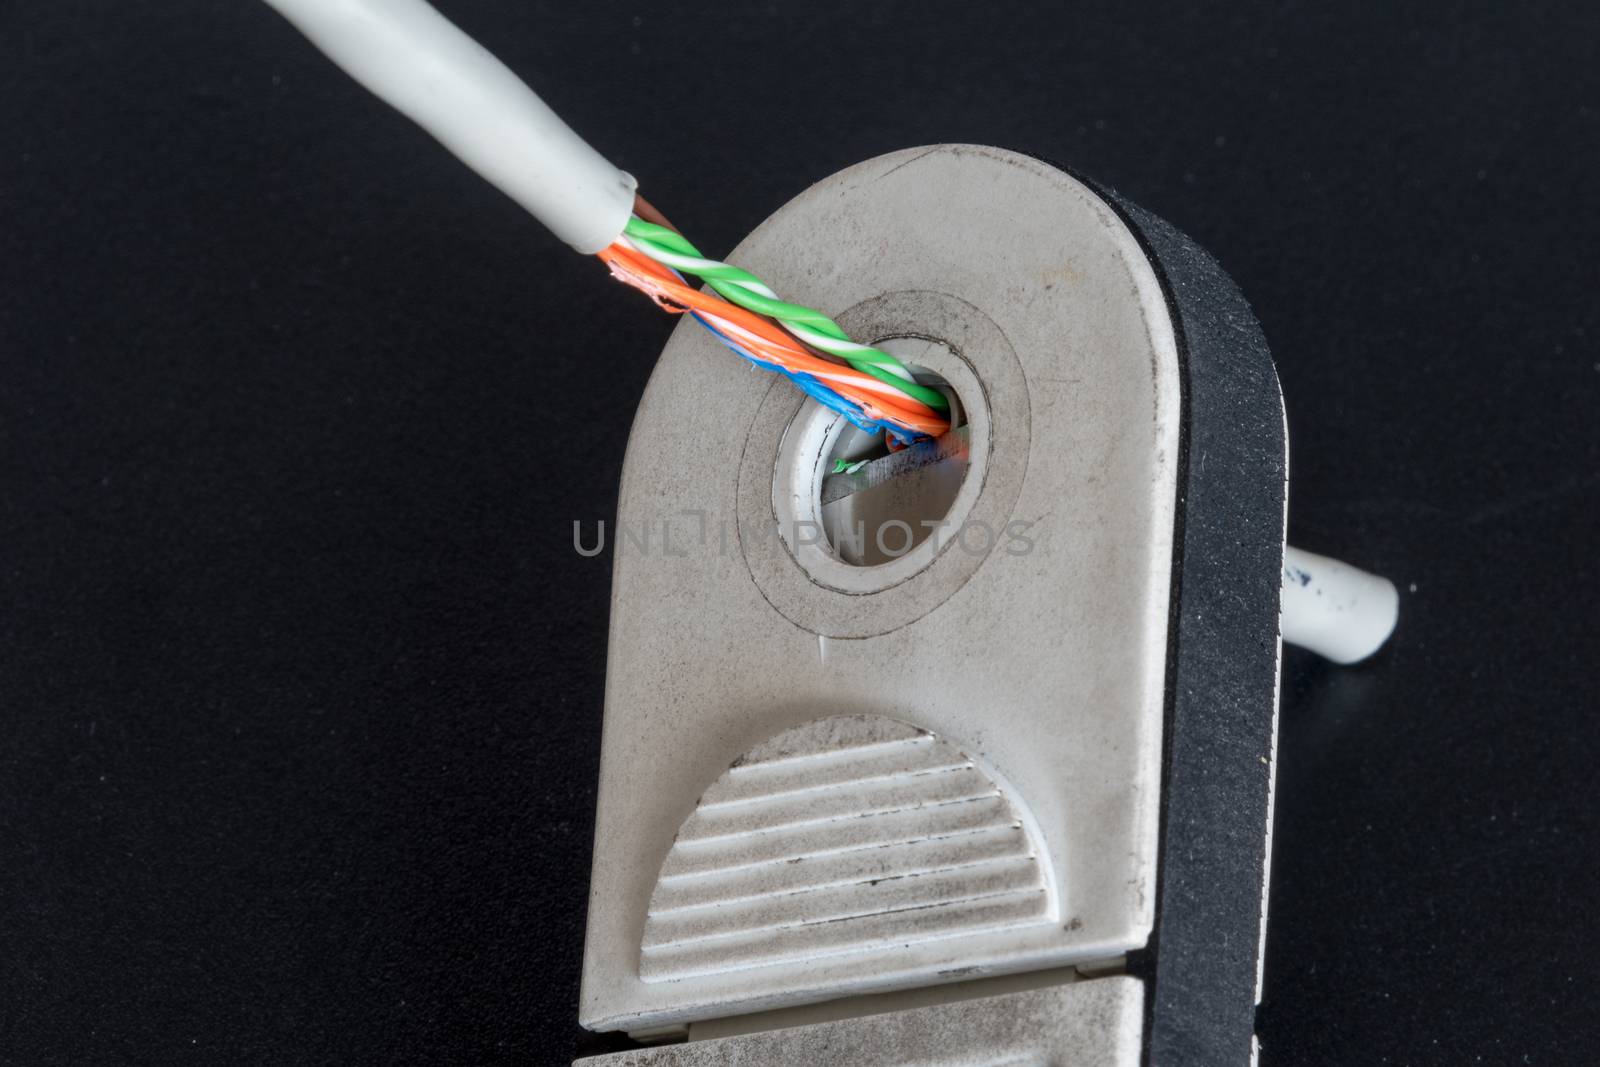 Stripping Ethernet cable by Russell102